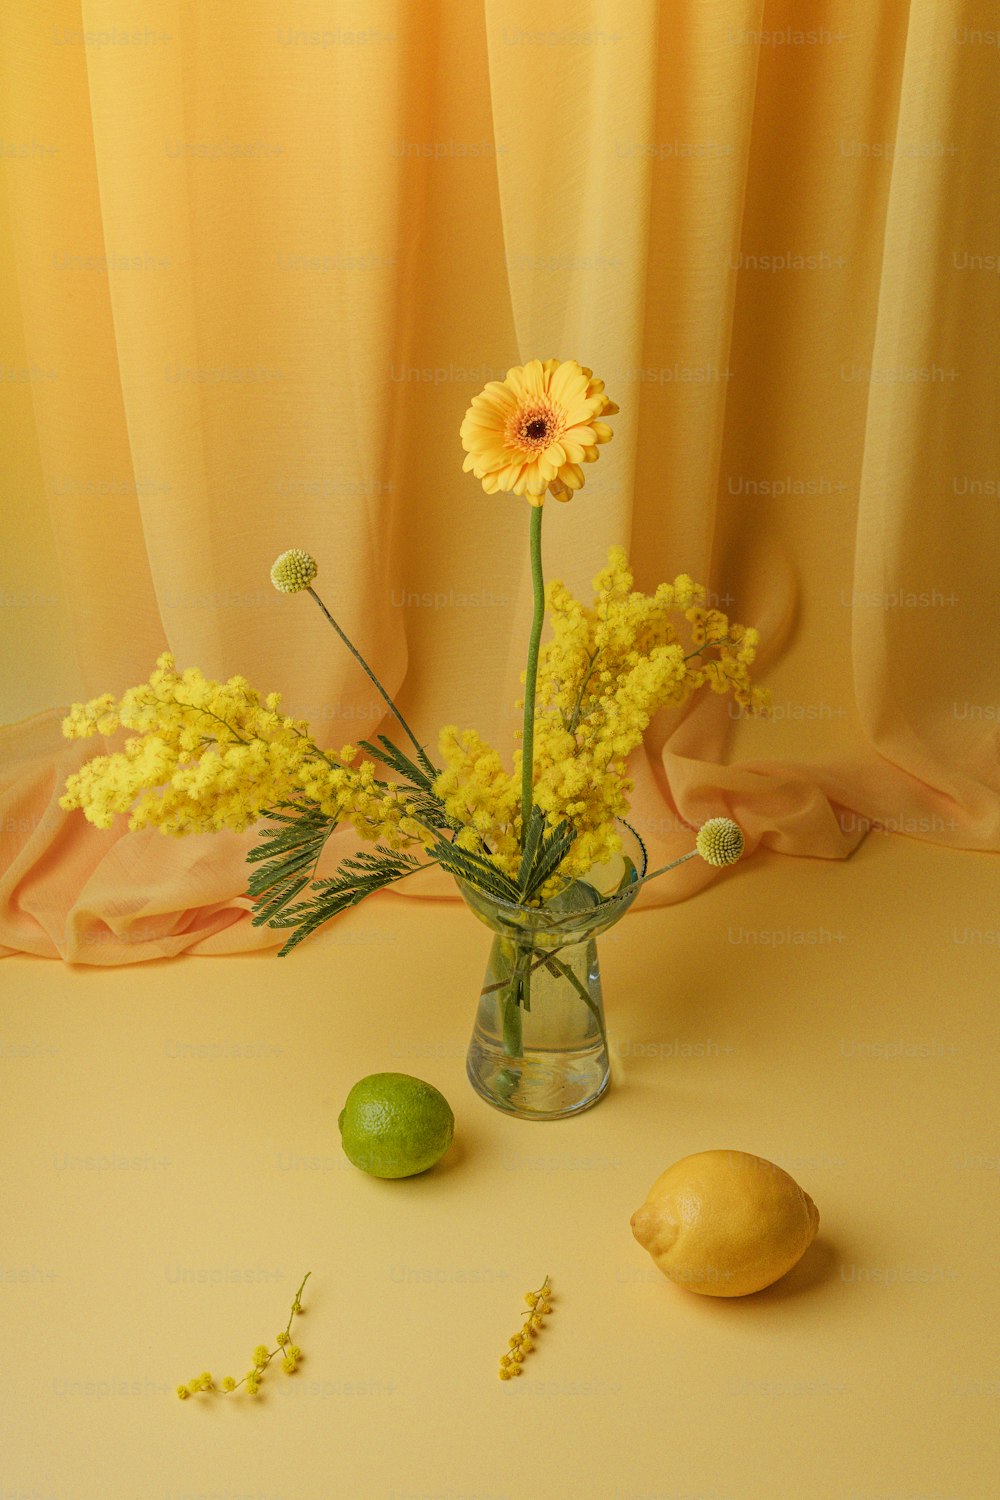 a vase with flowers and lemons on a table